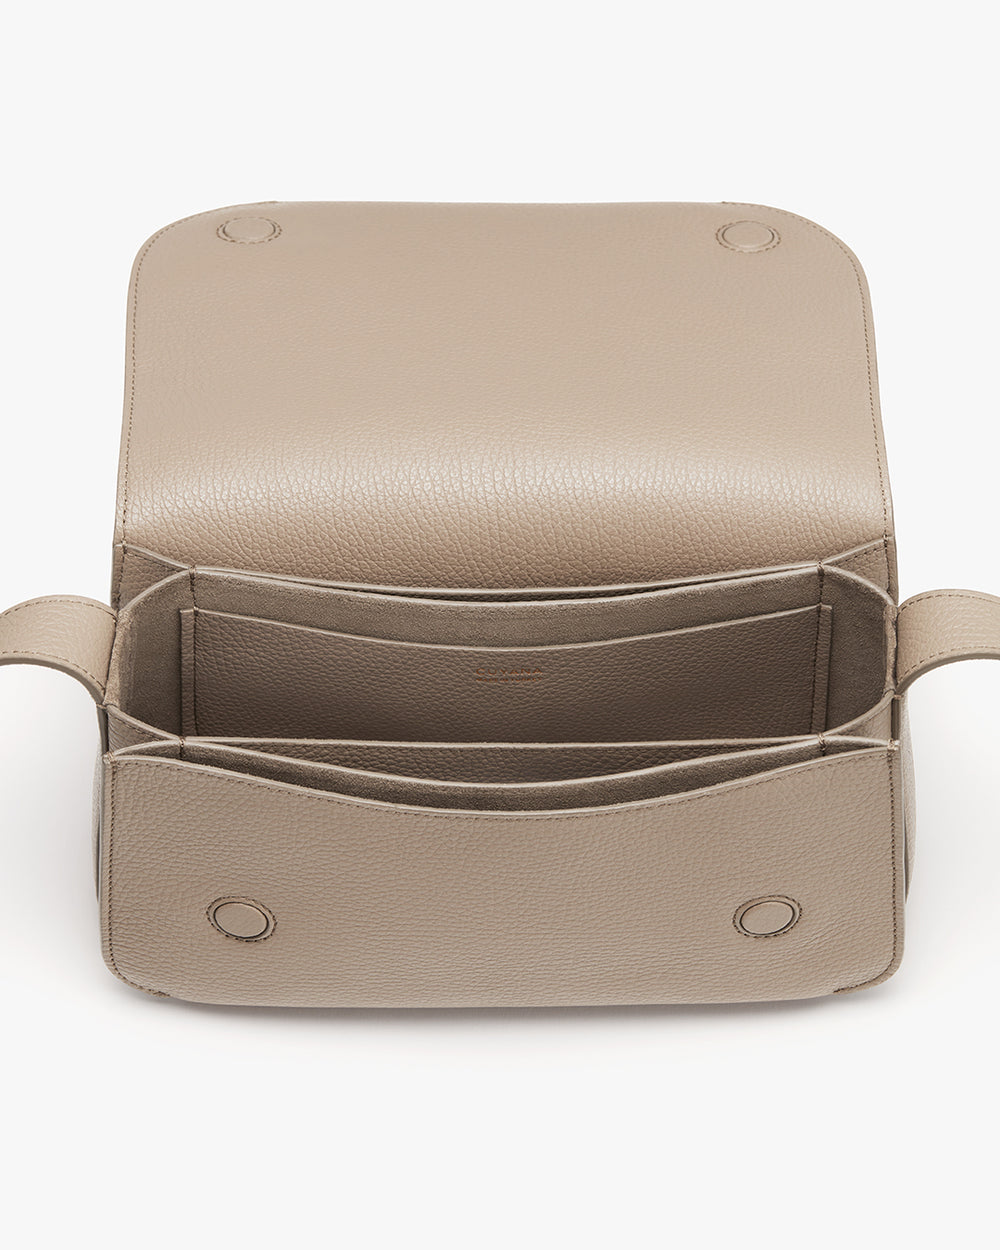 Open leather bag with visible compartments and flap closure.